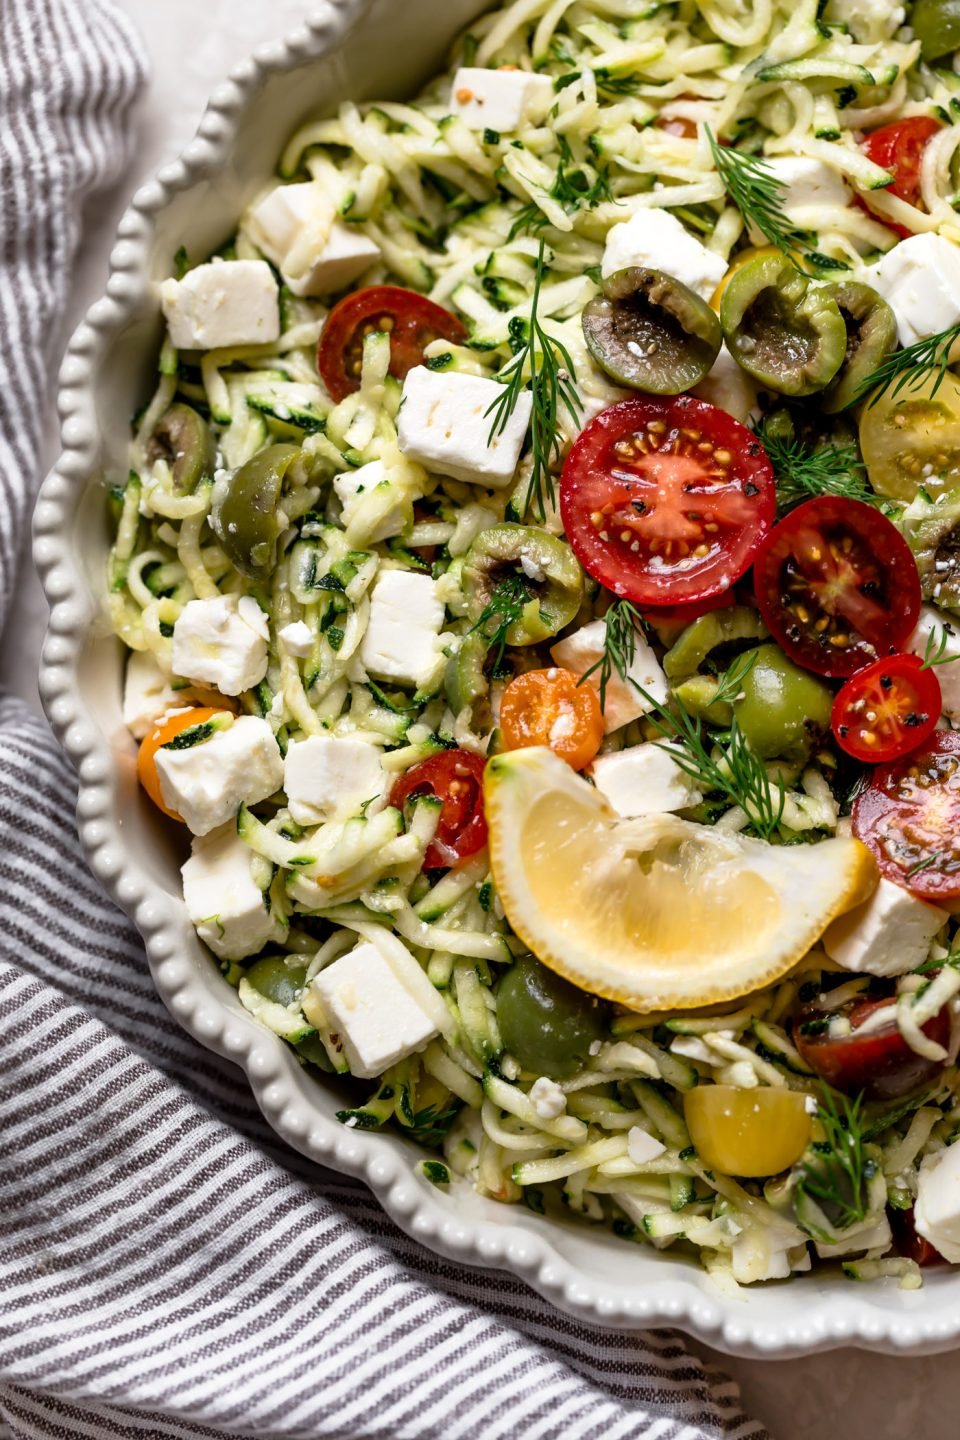 bowl of grated zucchini salad with lemon wedge